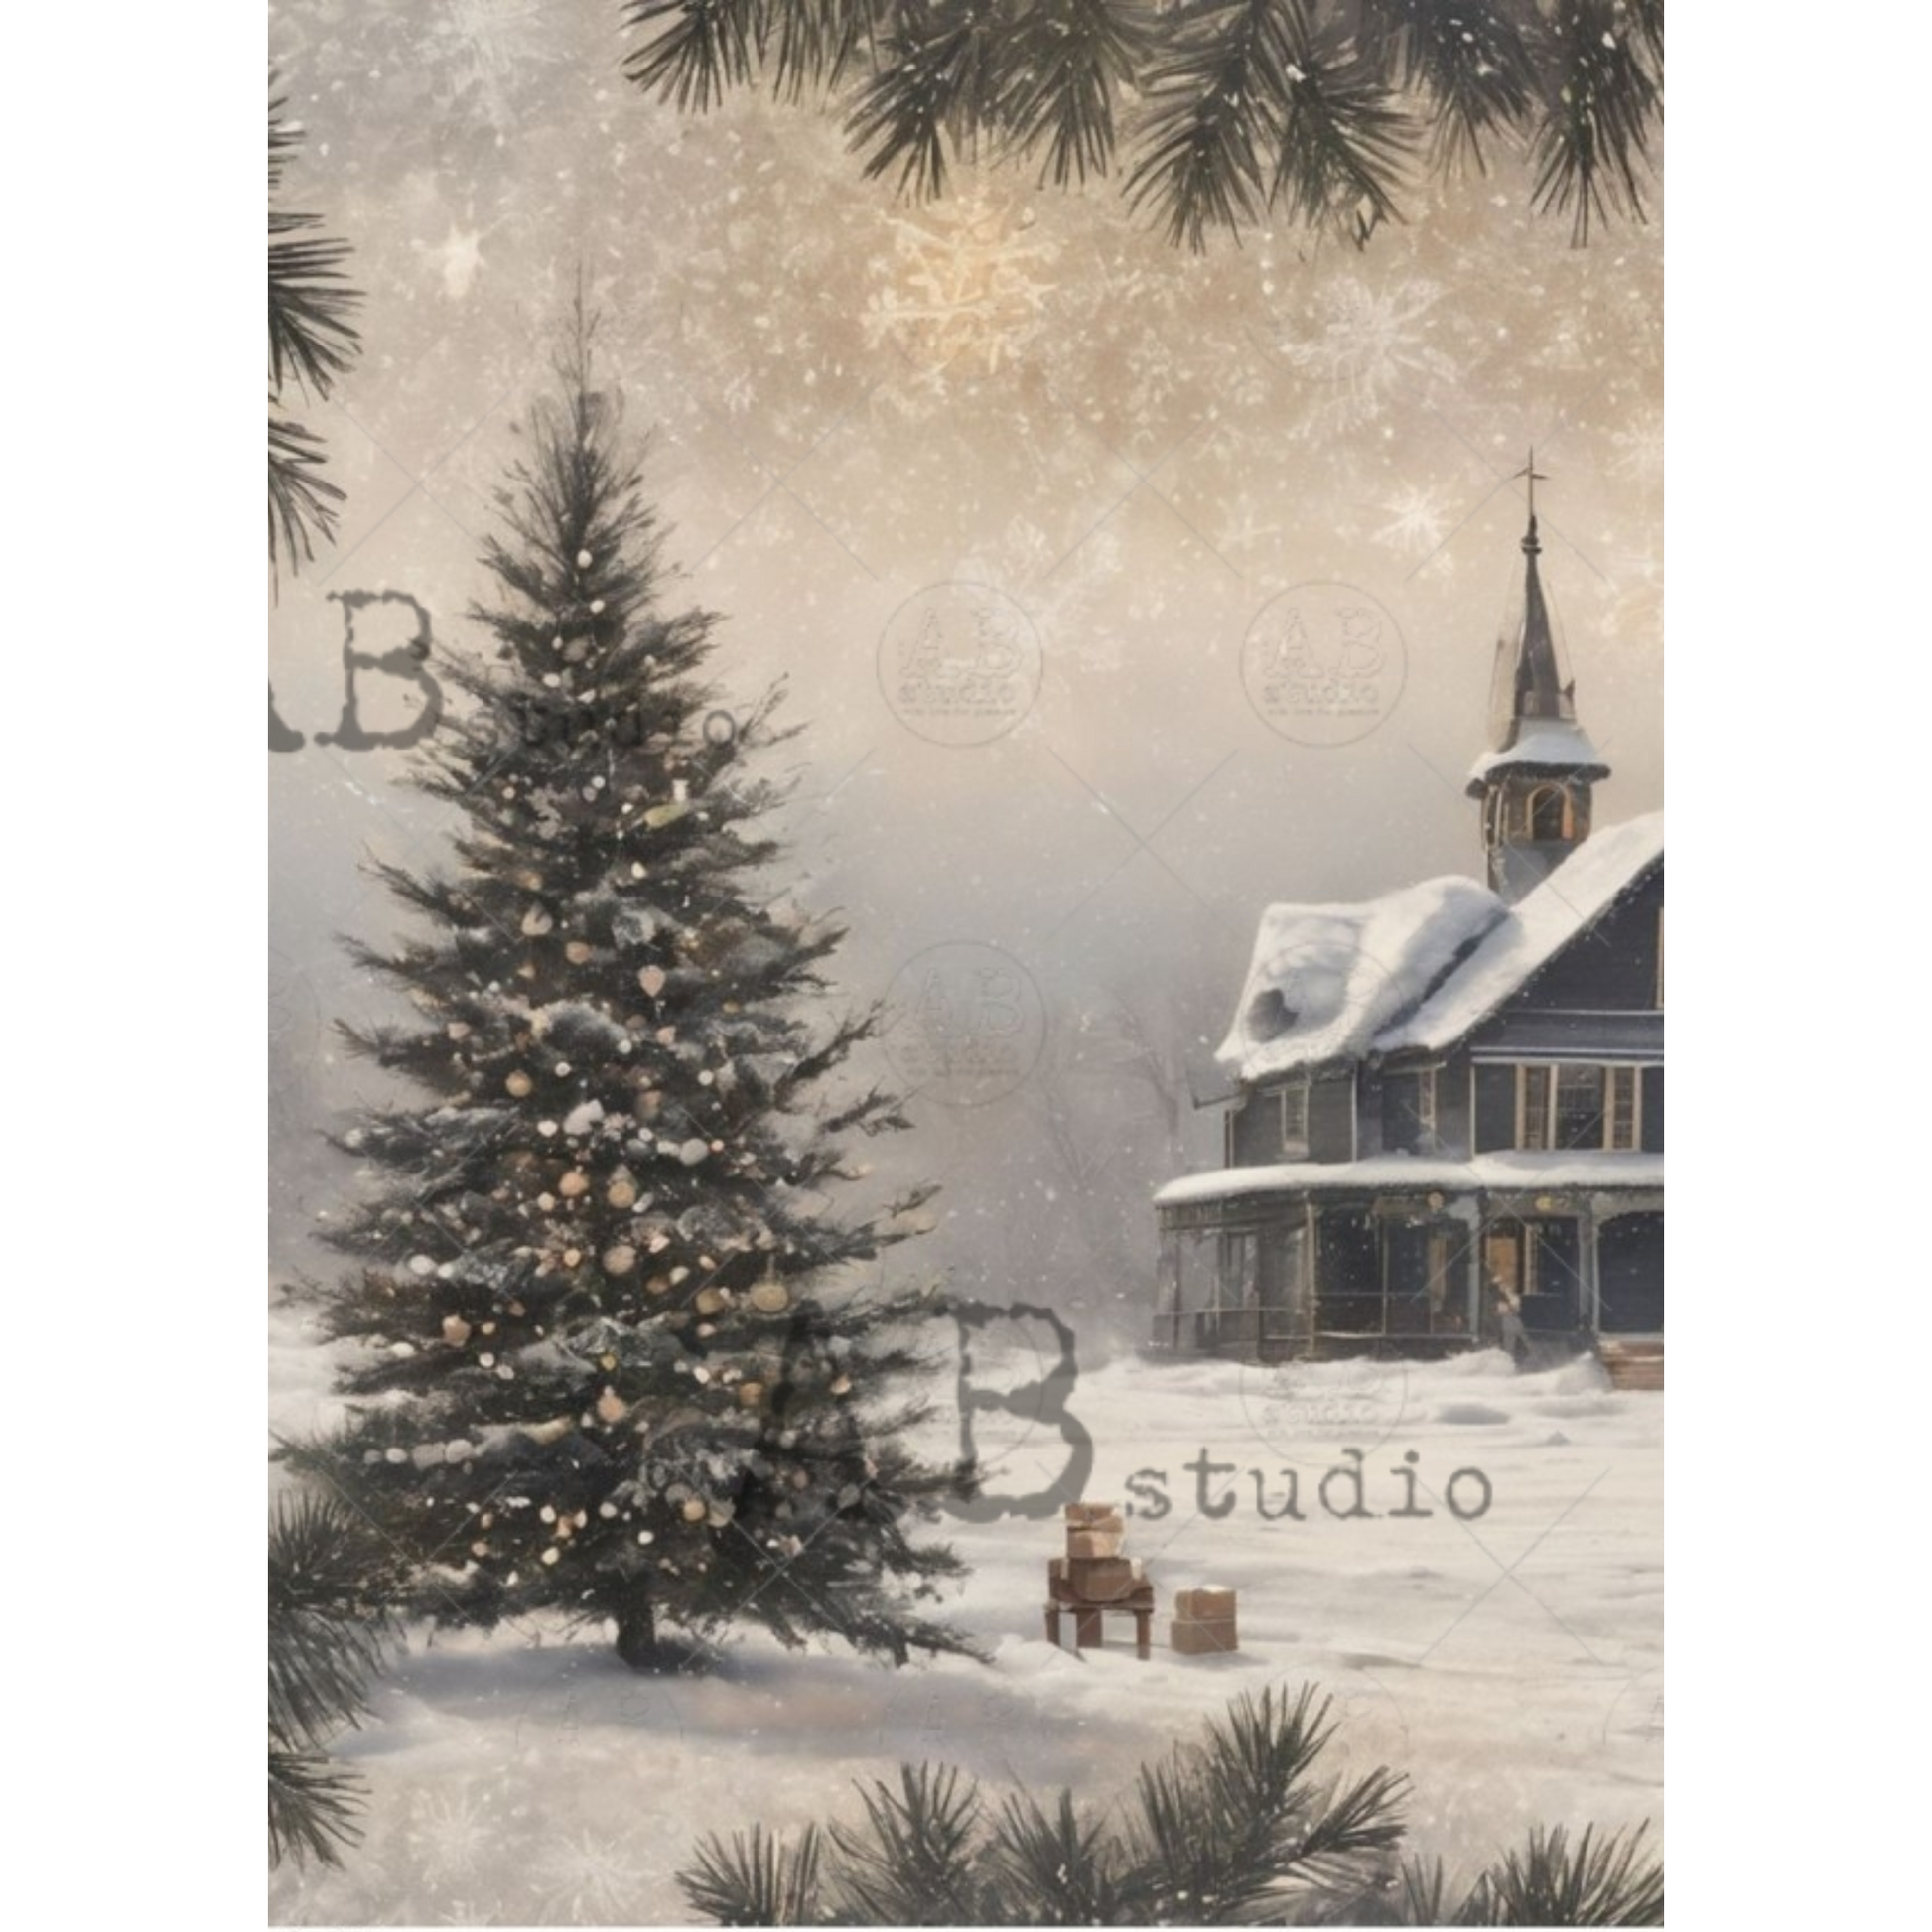 "Tree and Winter Church" decoupage rice paper by AB Studio. Available at Milton's Daughter.